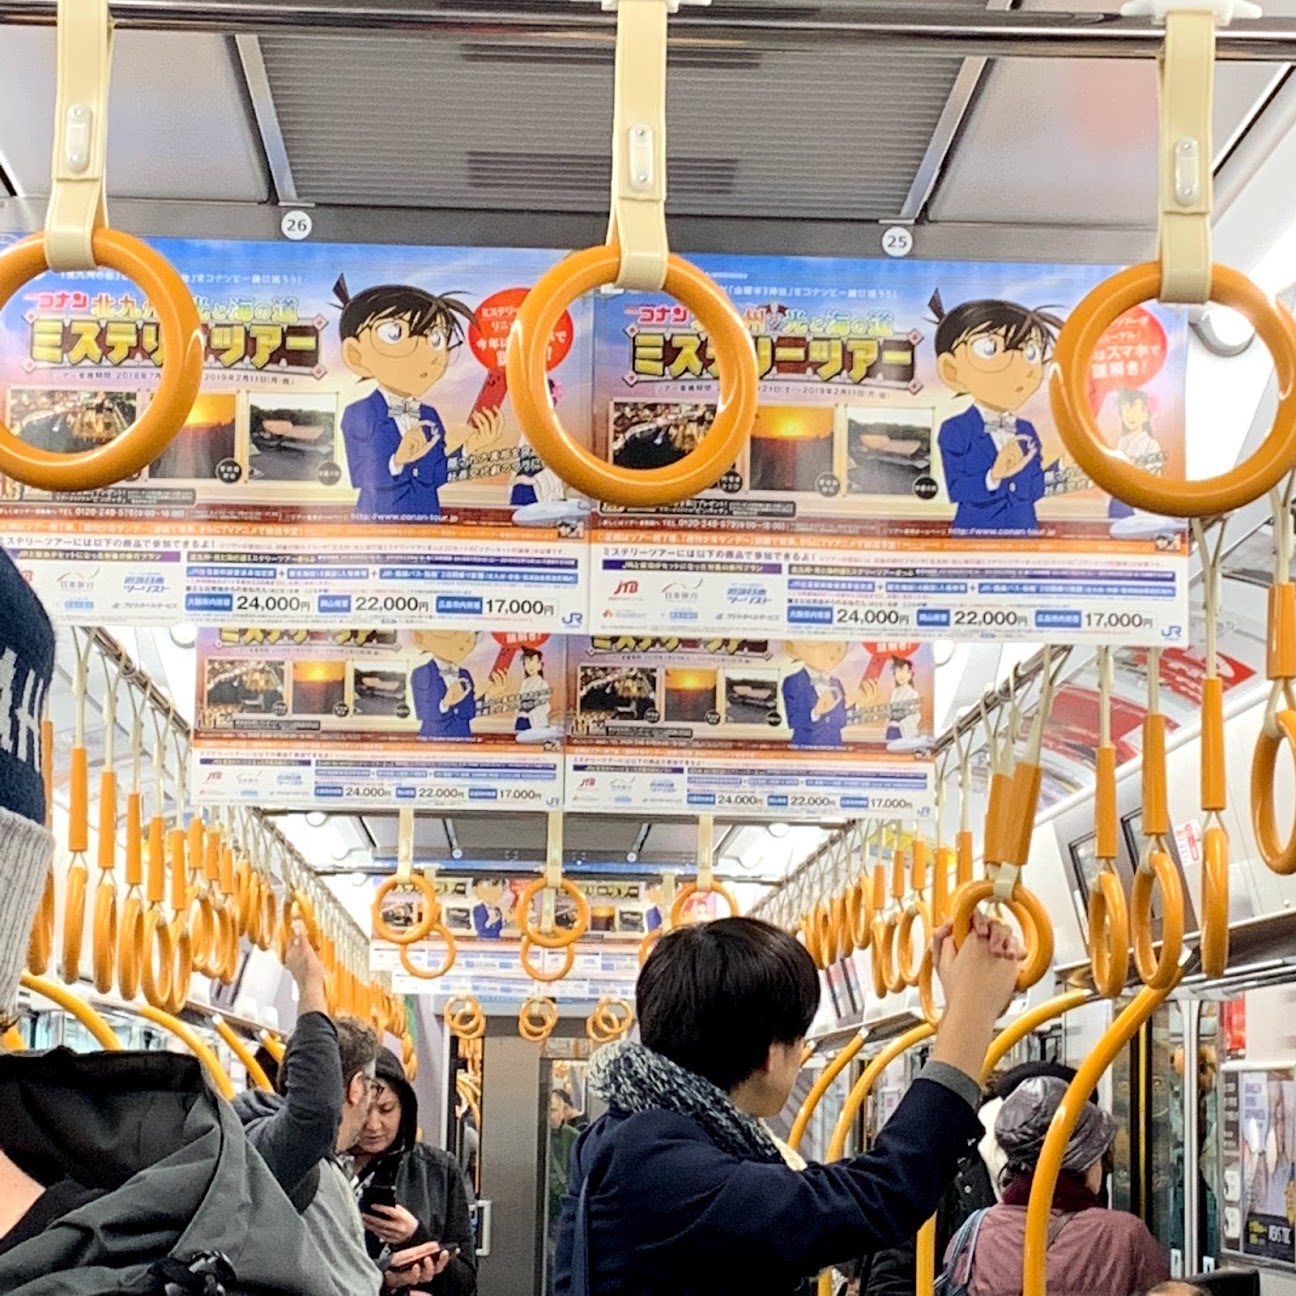 Interior of Japanese public transportation with iconography for Detective Conan on banners